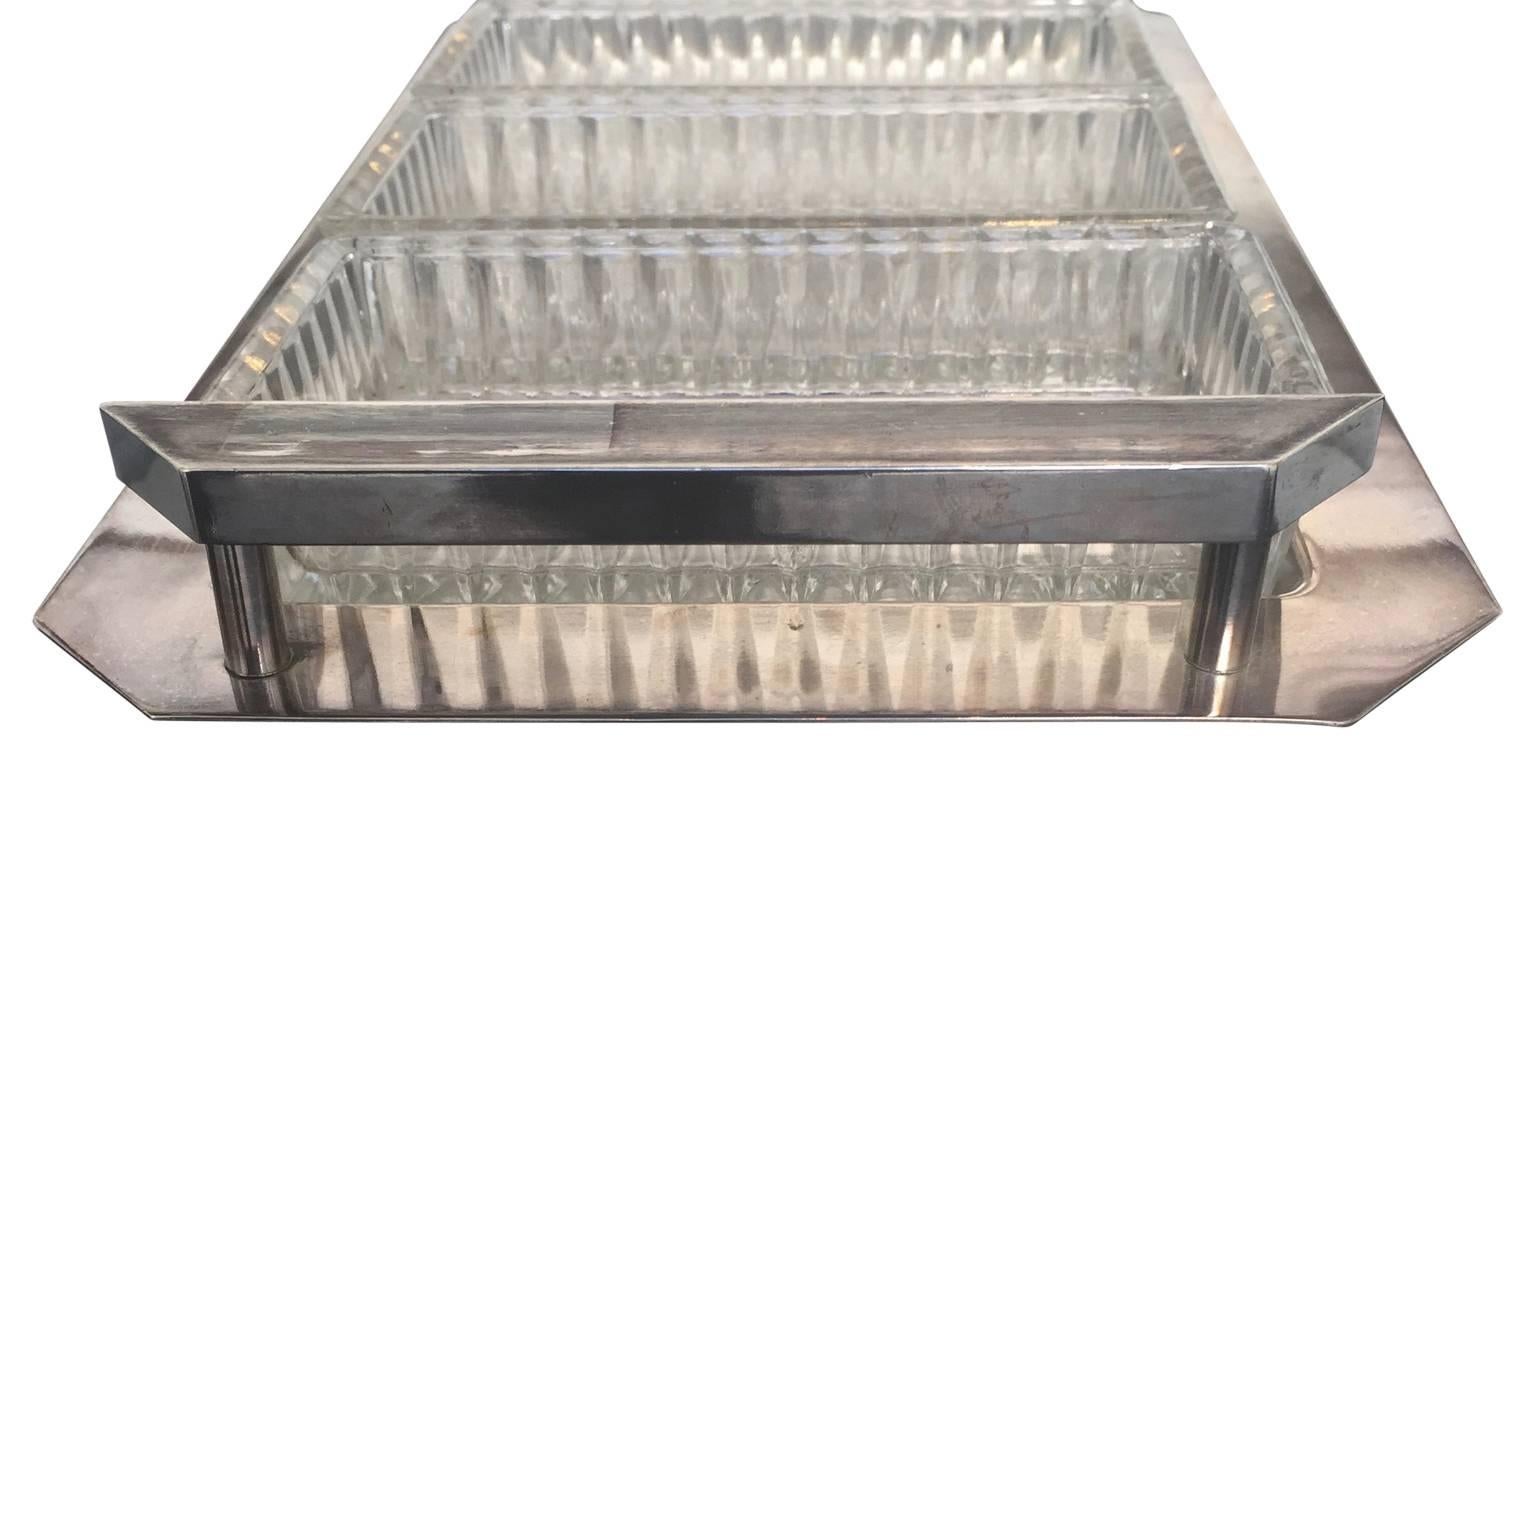 Art Deco Mid-Century Modern Serving Tray with Four Snack Glass Tray